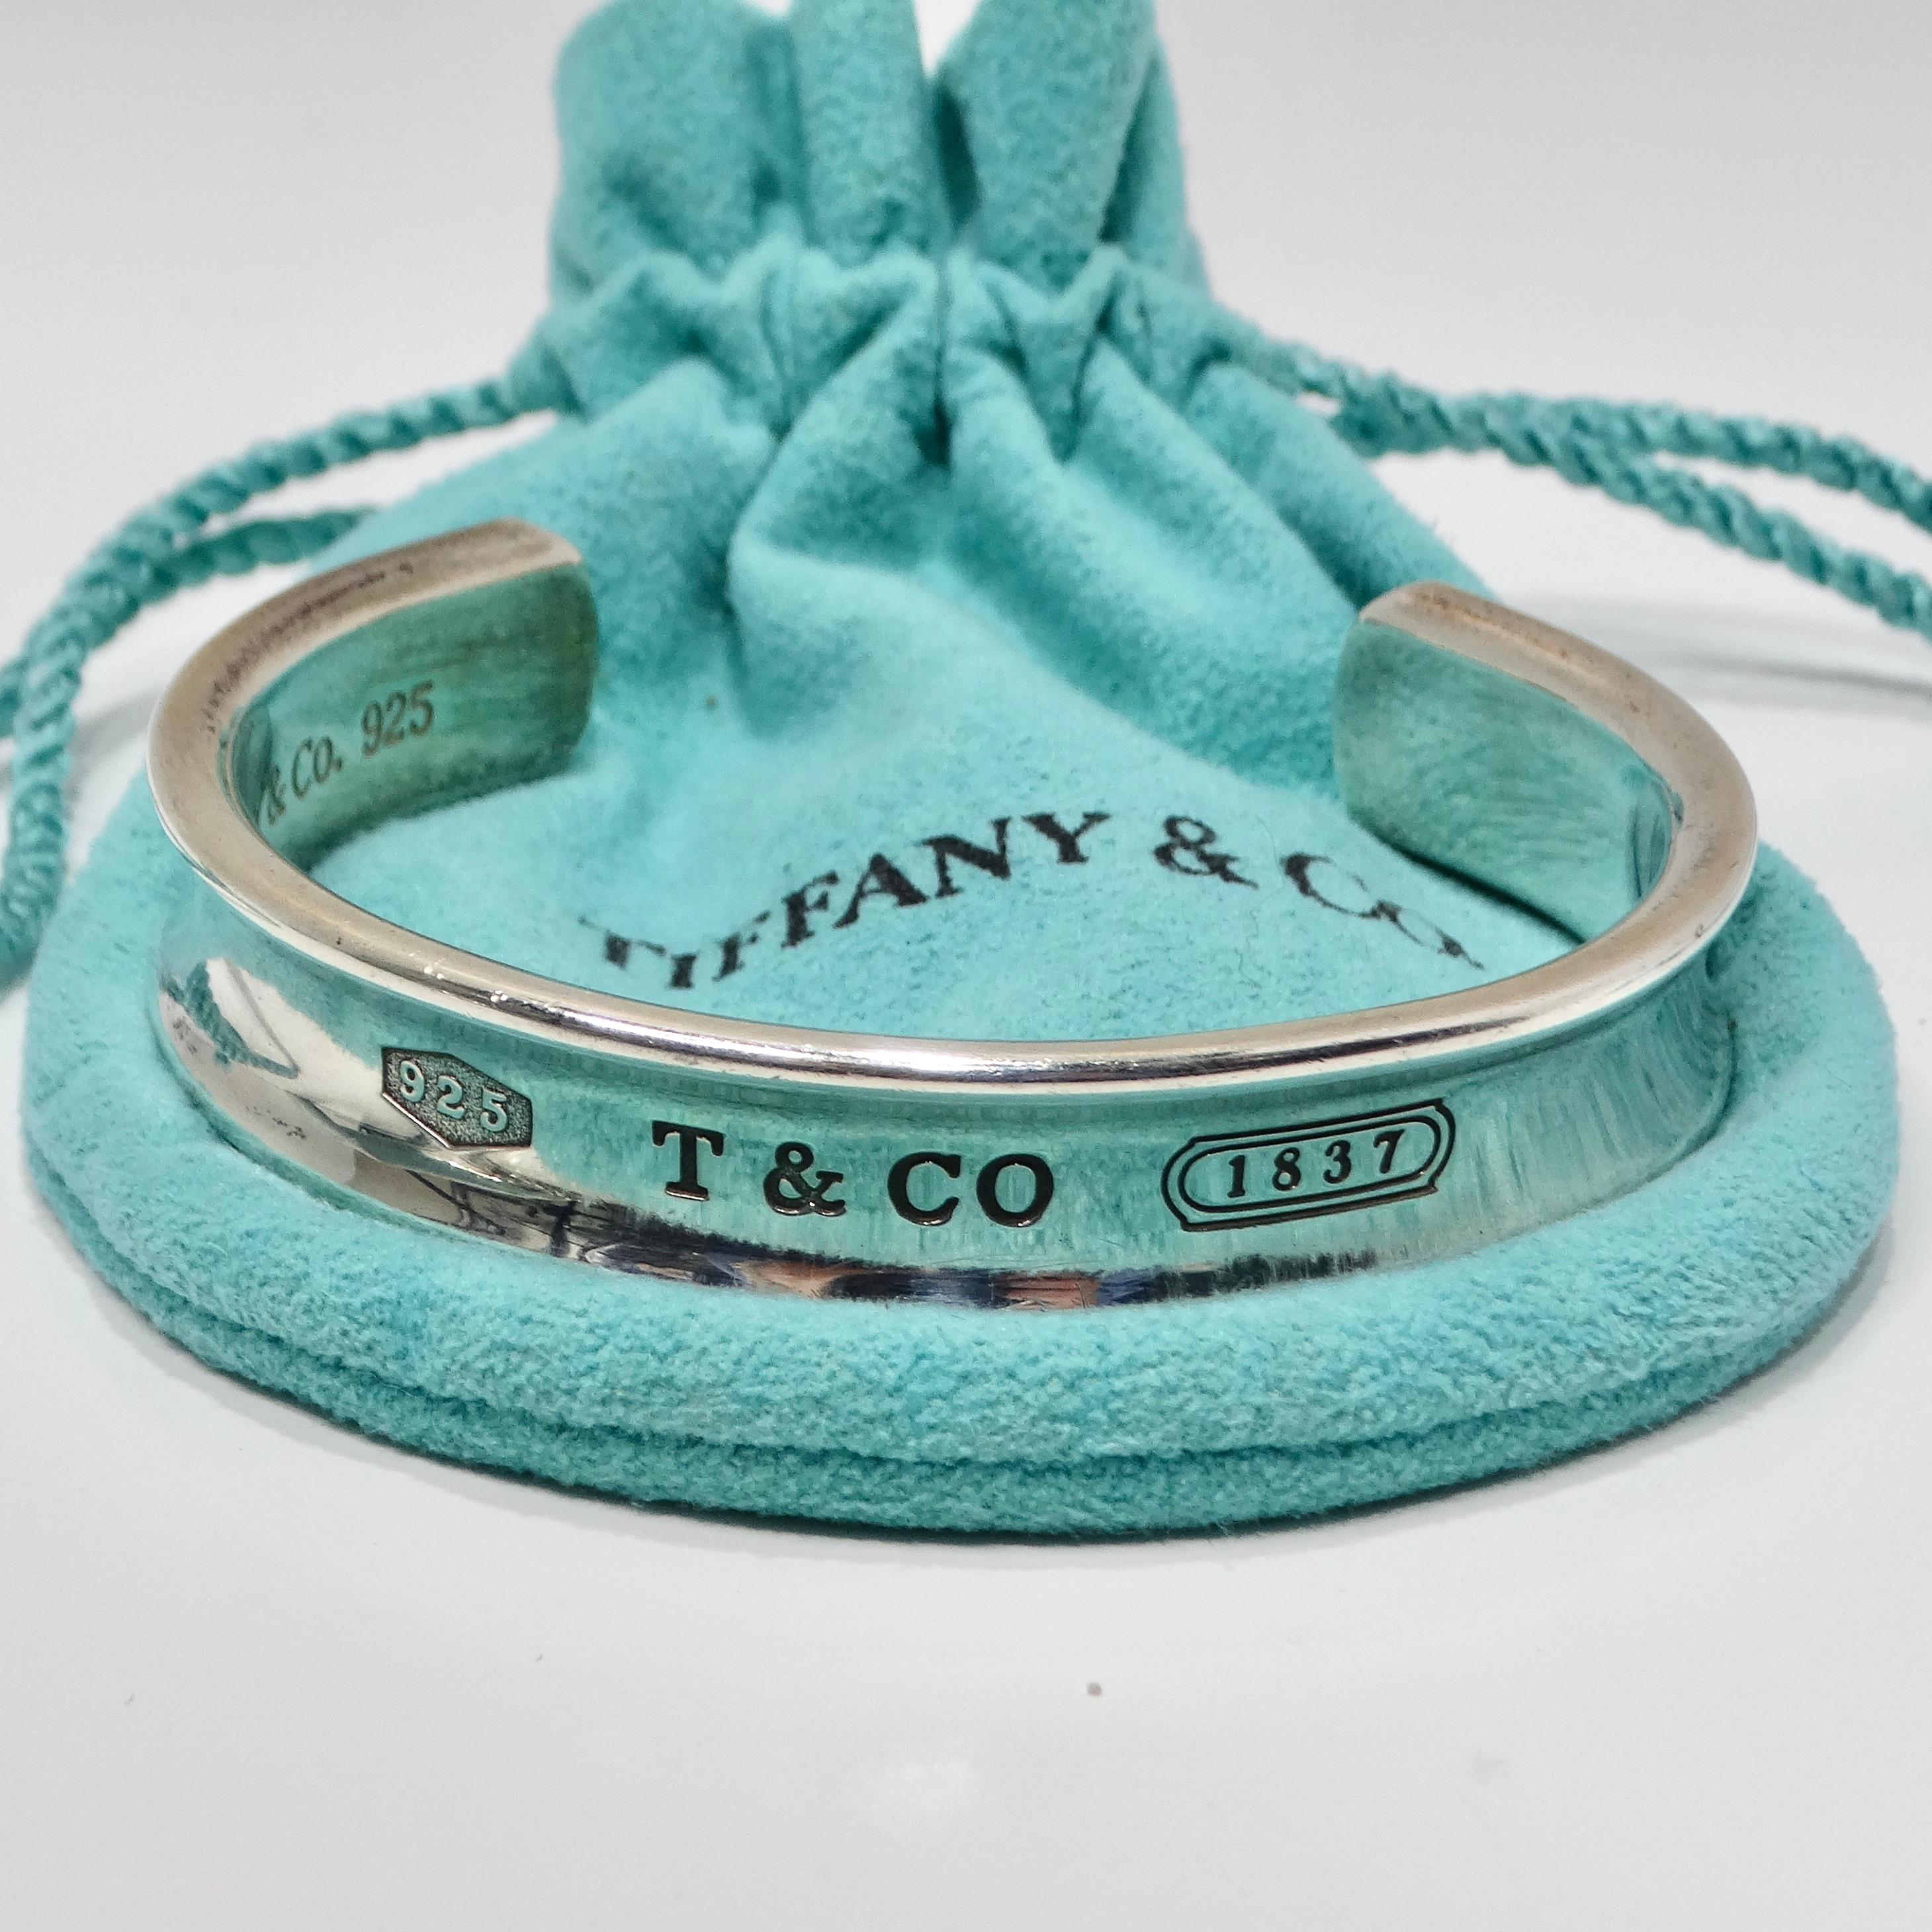 Tiffany & Co 1997 Silver 1925 Engraved Cuff Bracelet In Good Condition For Sale In Scottsdale, AZ